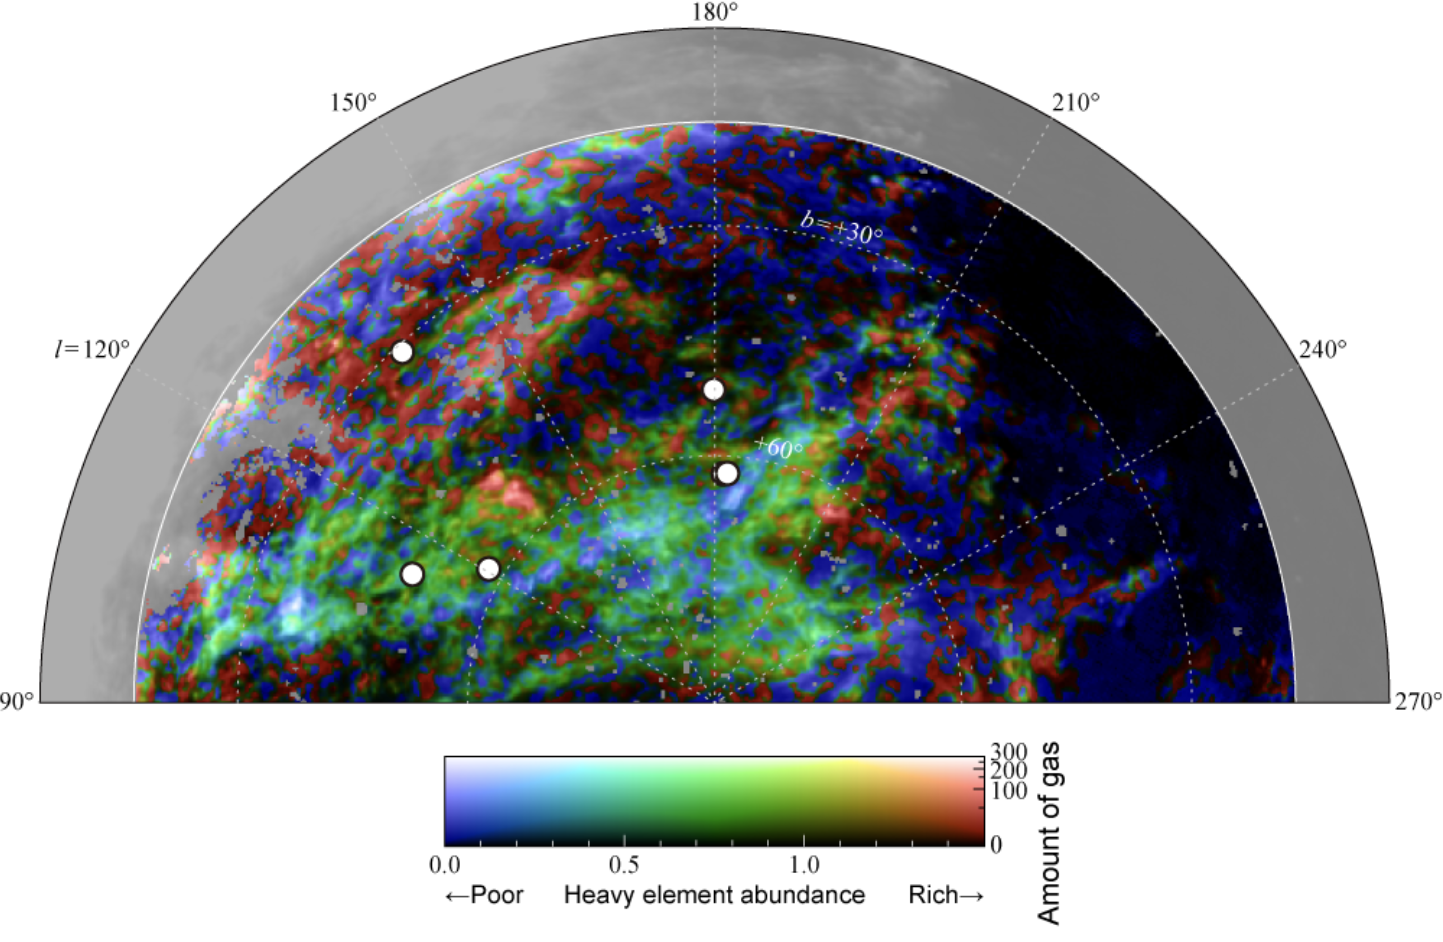 Revealing the Galactic Origins Through Heavy-Element Mapping Challenges